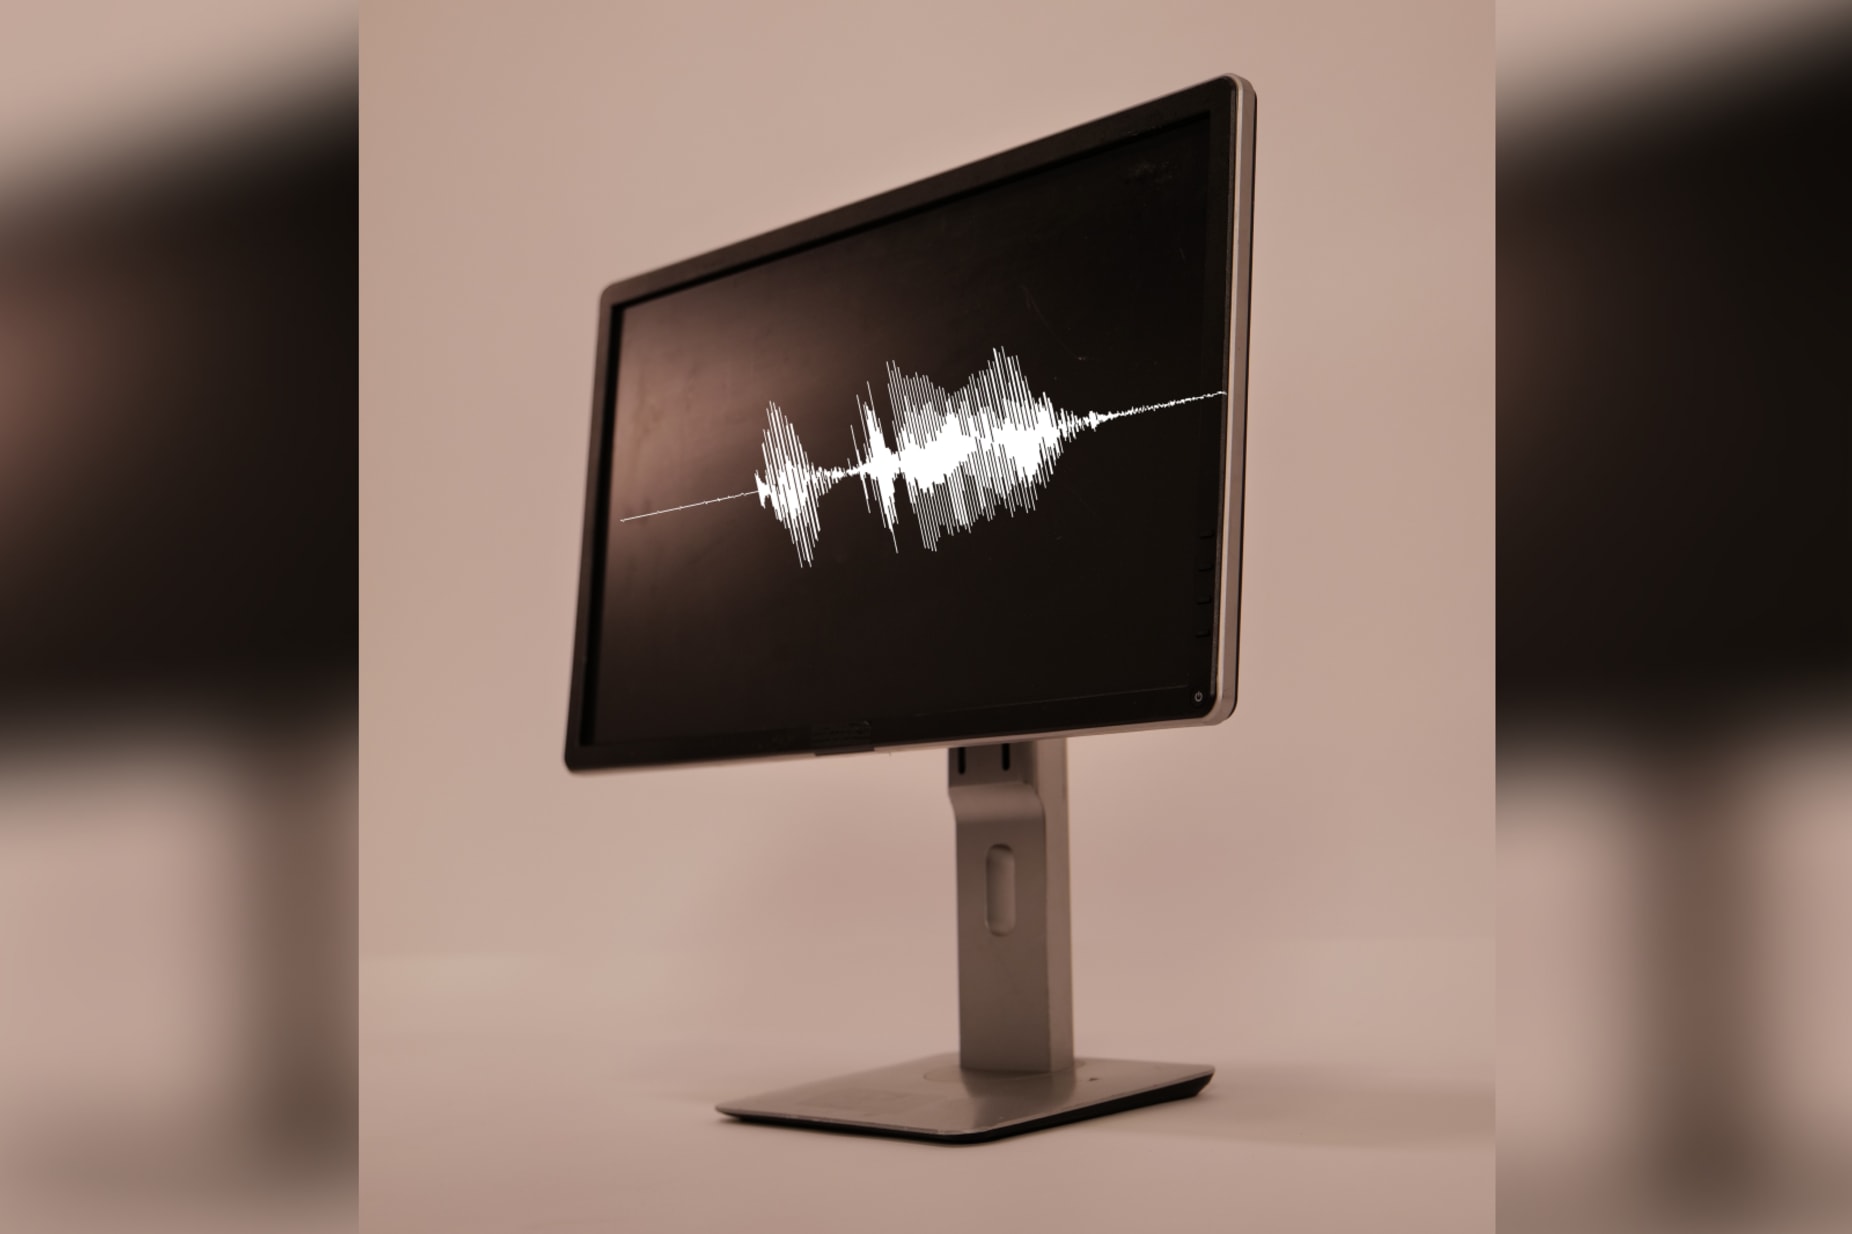 Standing big and bold like a monolith on a neutral background, a monitor displays a white waveform against its black screen.